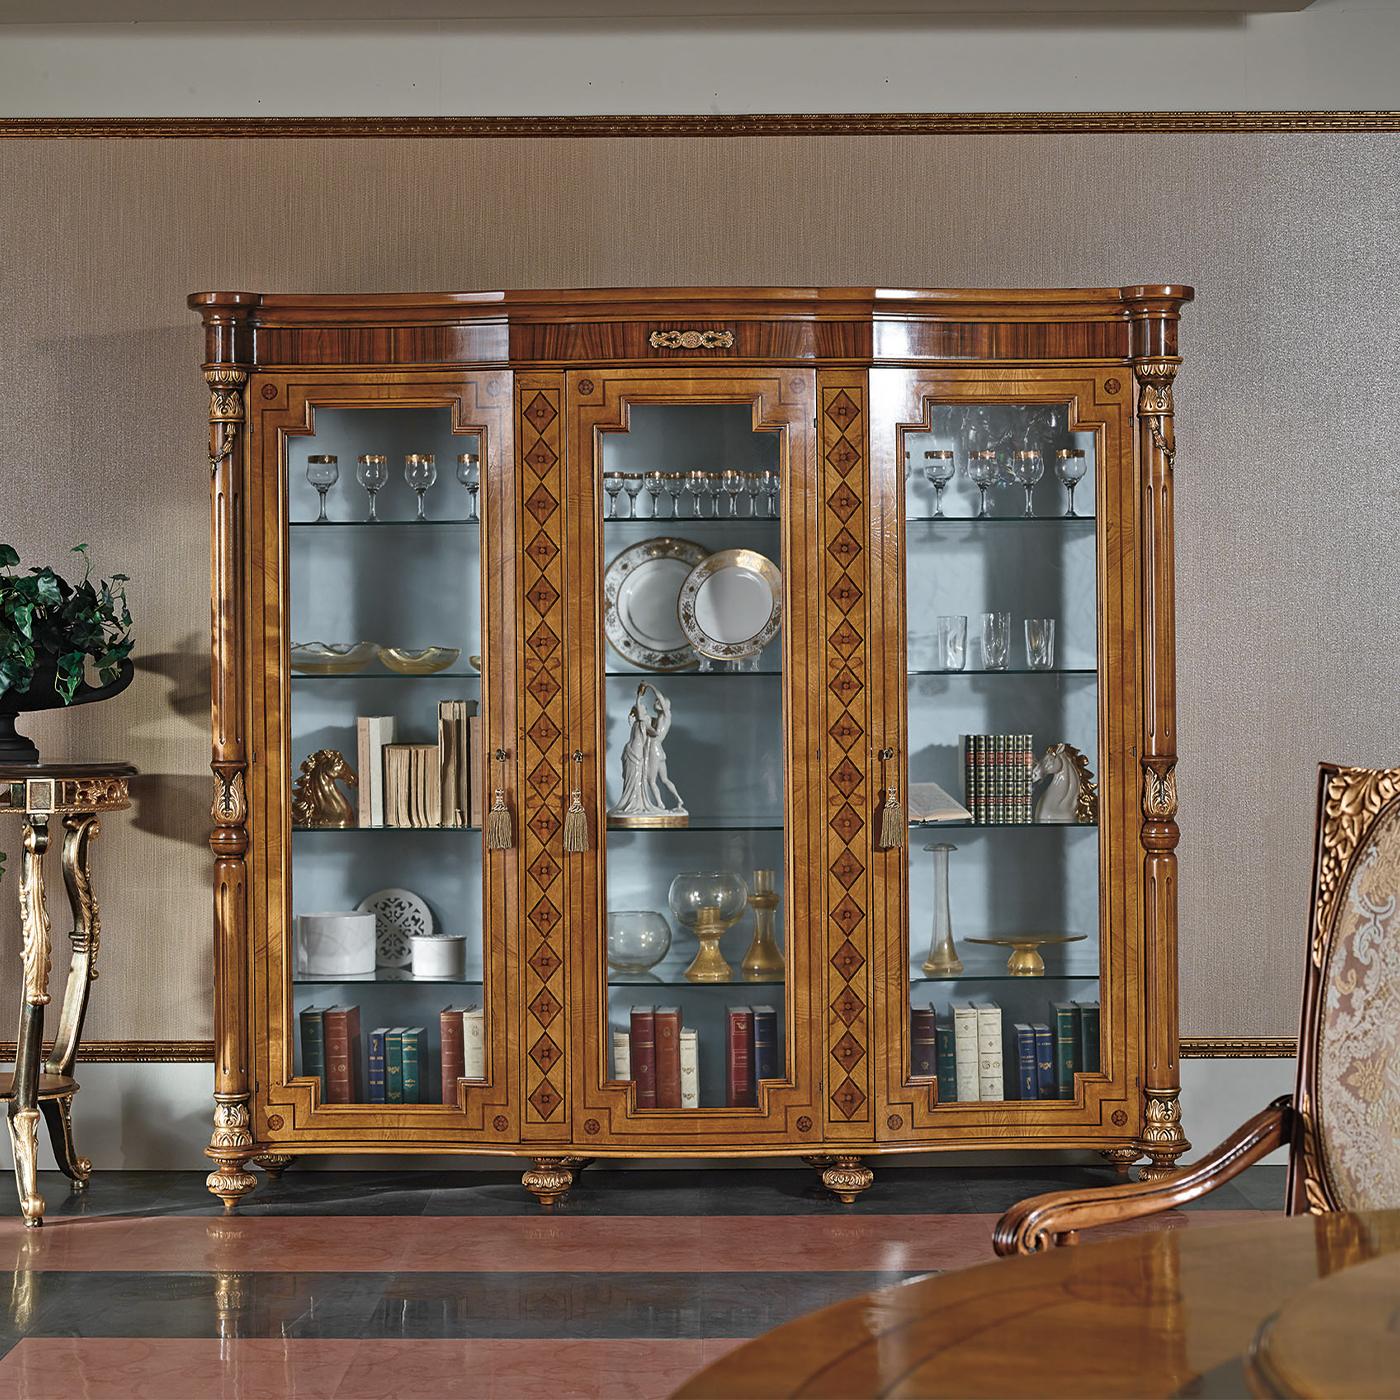 A jewel of fine joinery, this three-door display cabinet will be the focal point in any classic living space. The imposing wooden frame (including the spinning top-shaped feet) is veneered in a combination of feathered ash, rosewood, and walnut